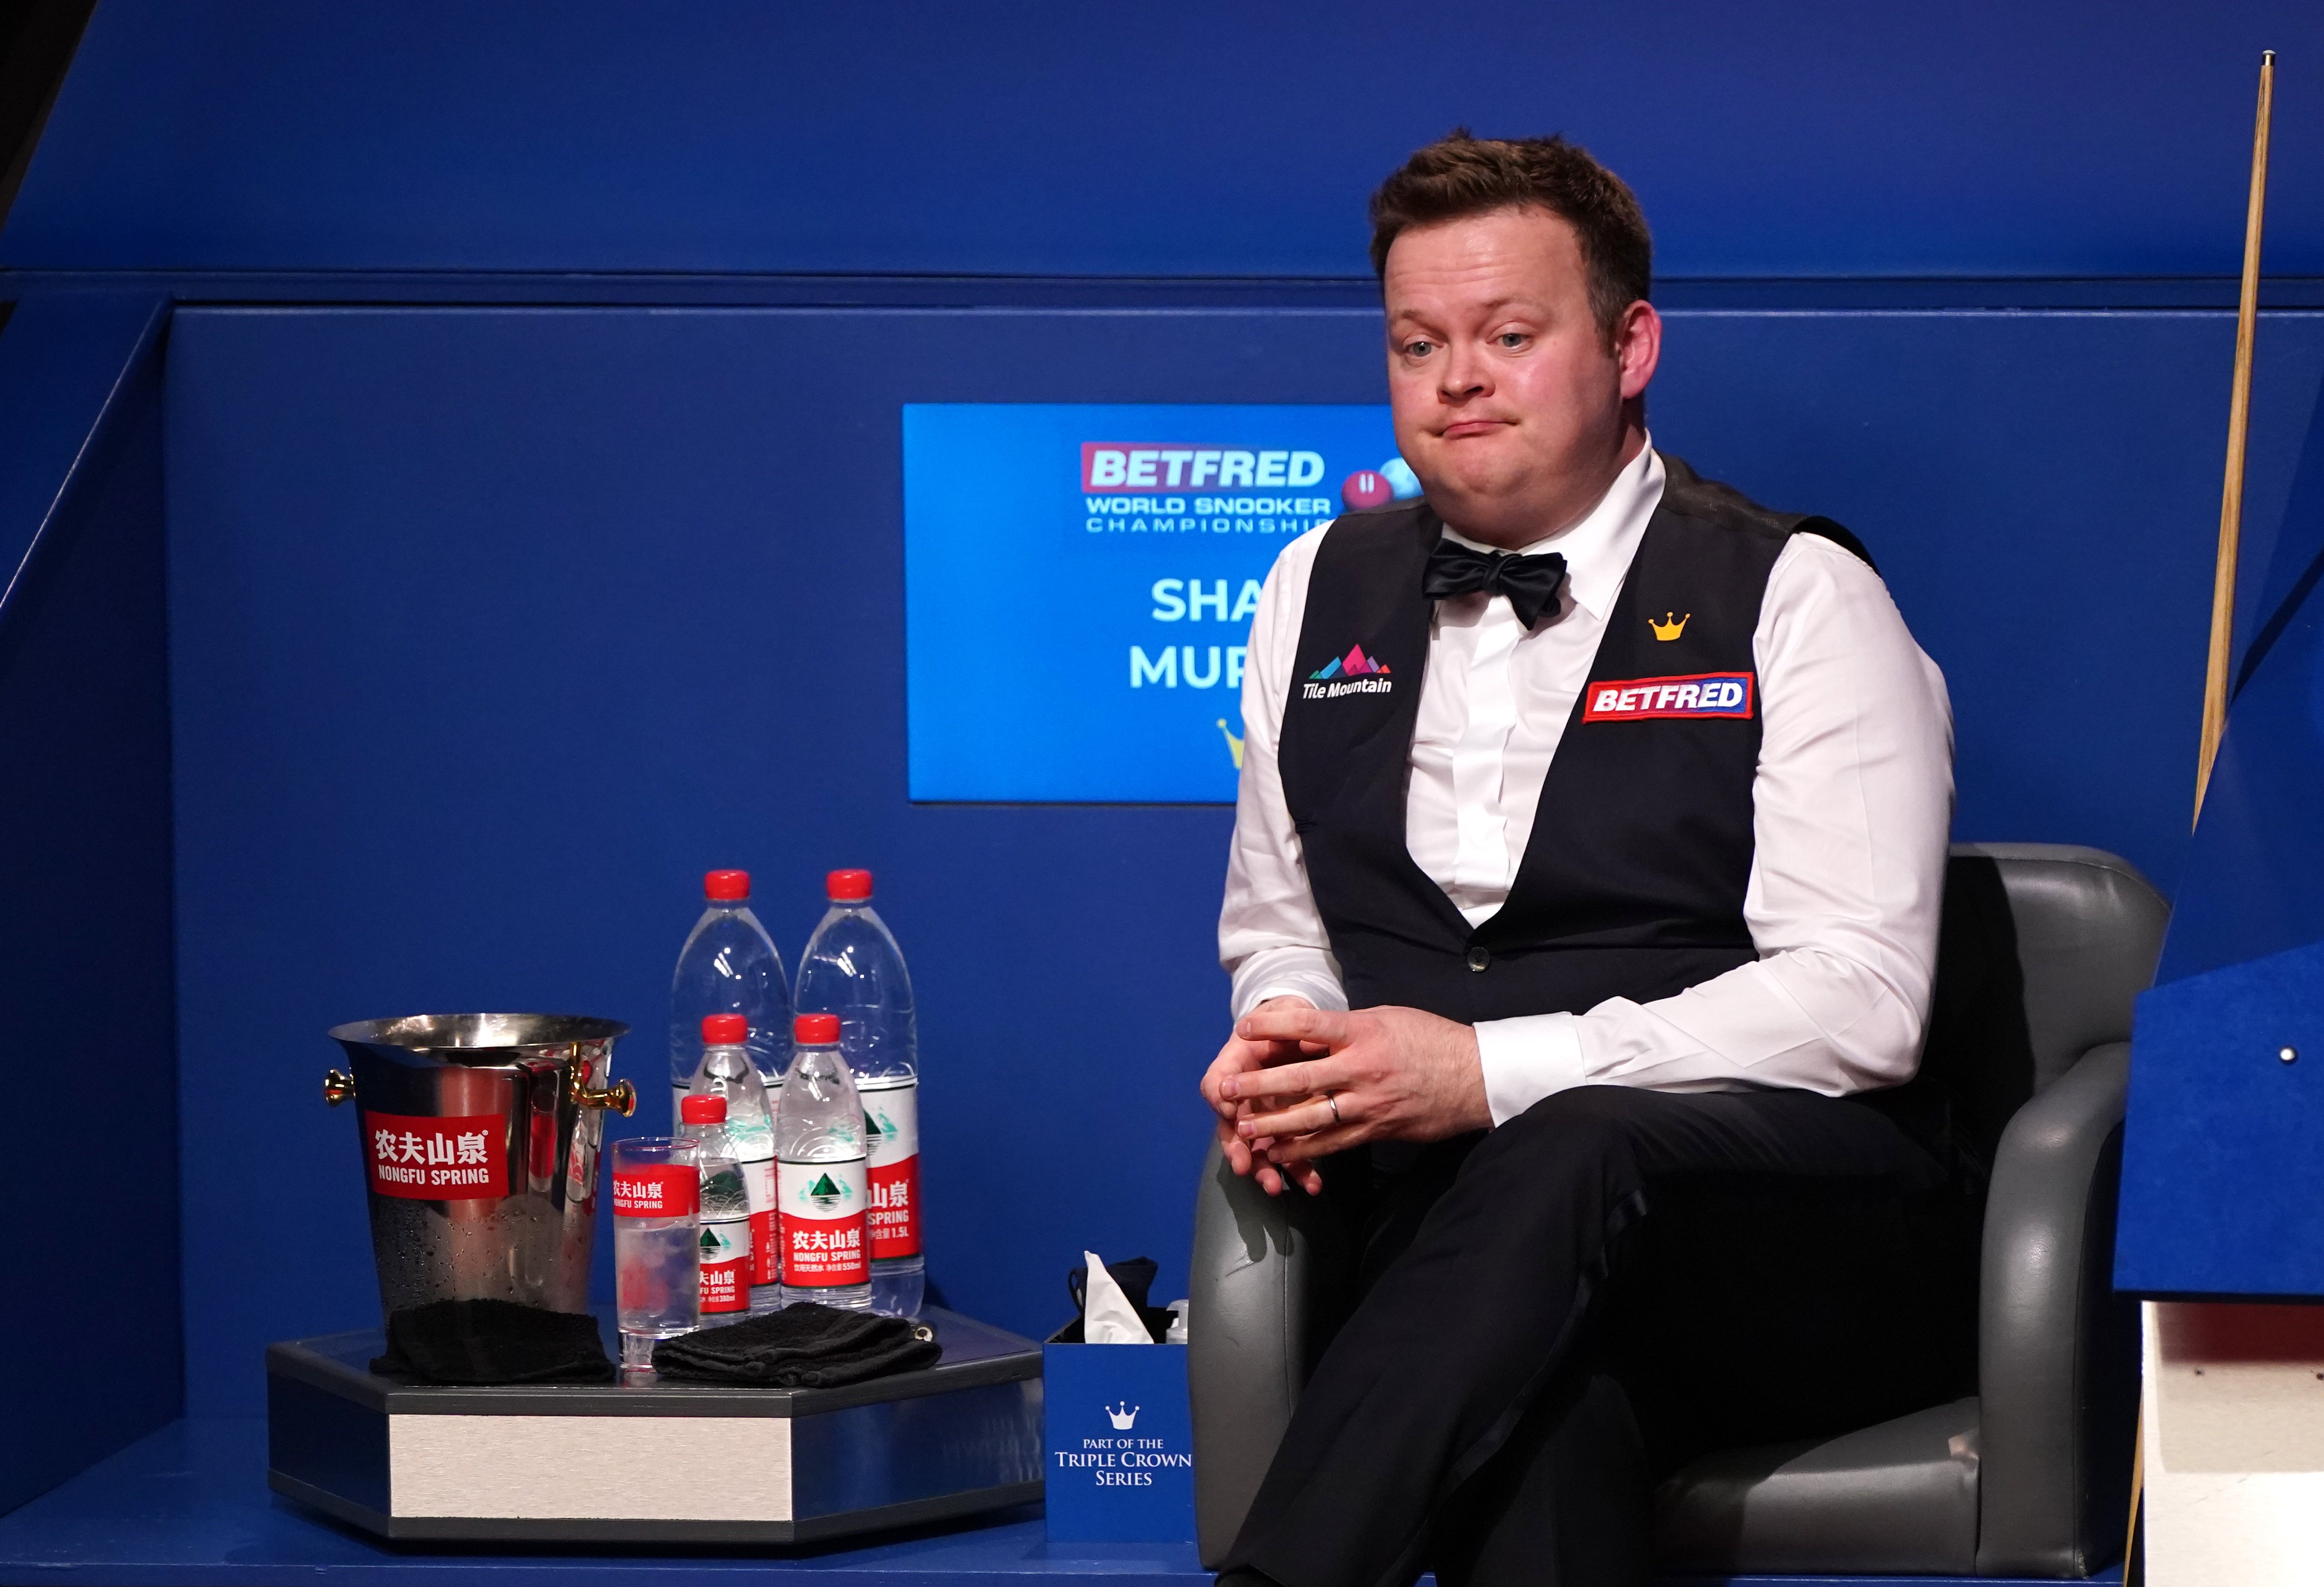 Shaun Murphy finished second best at the Crucible in May (Zac Goodwin/PA)